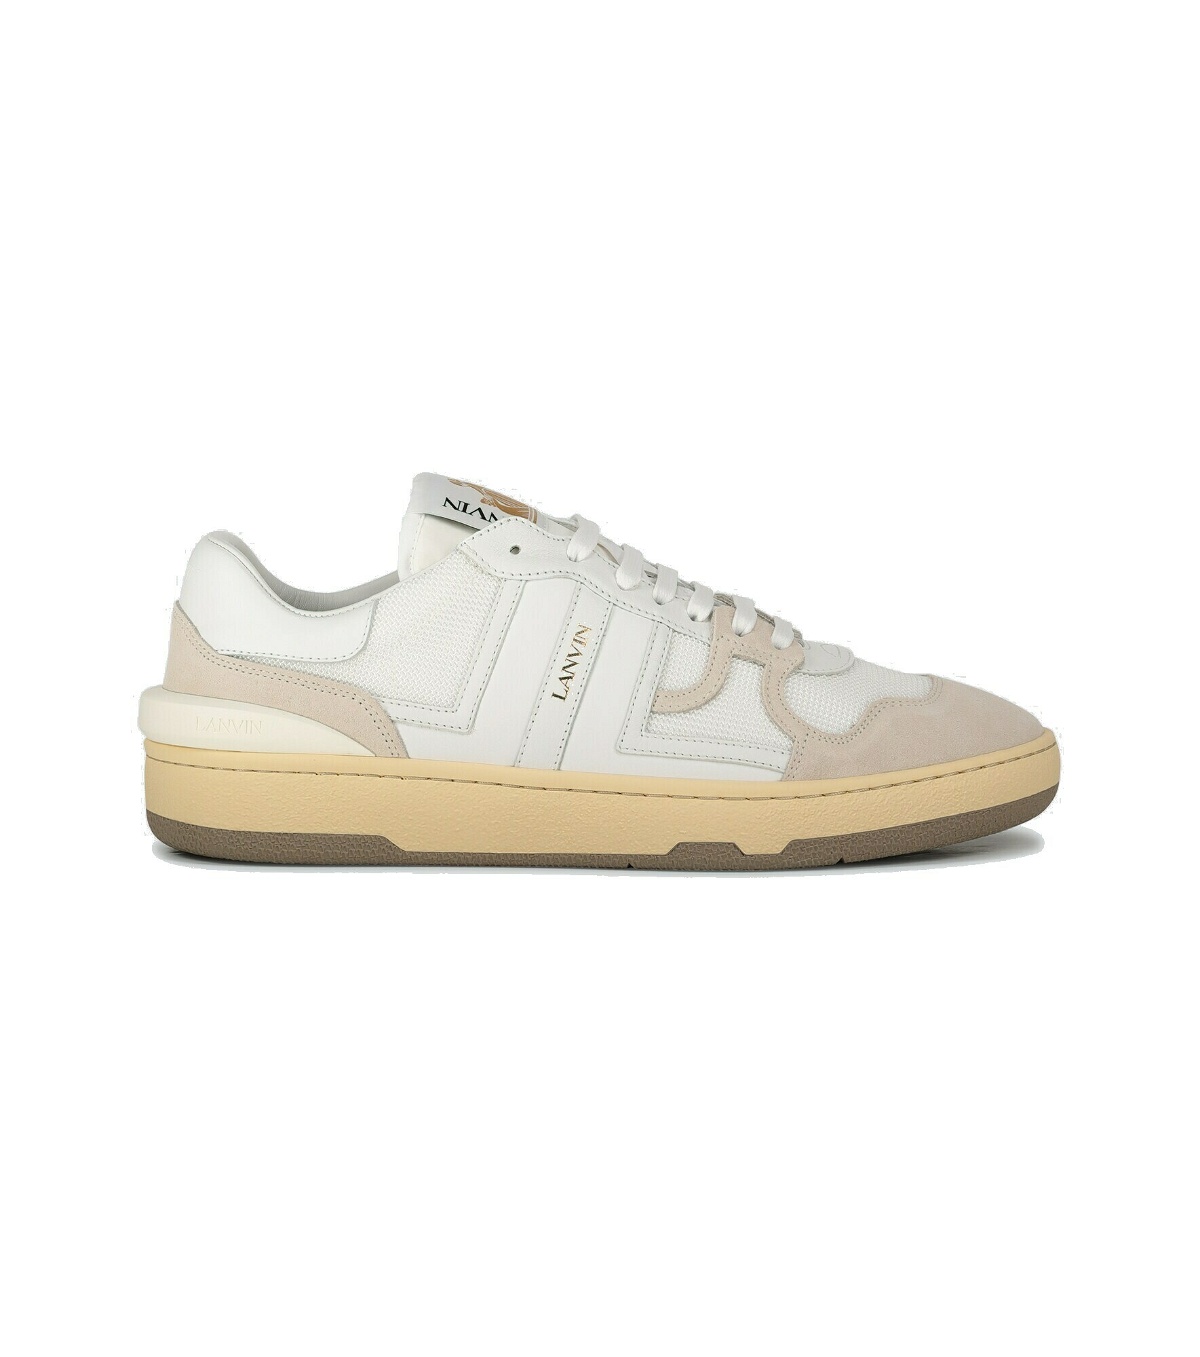 Lanvin - Clay leather low-top sneakers Lanvin